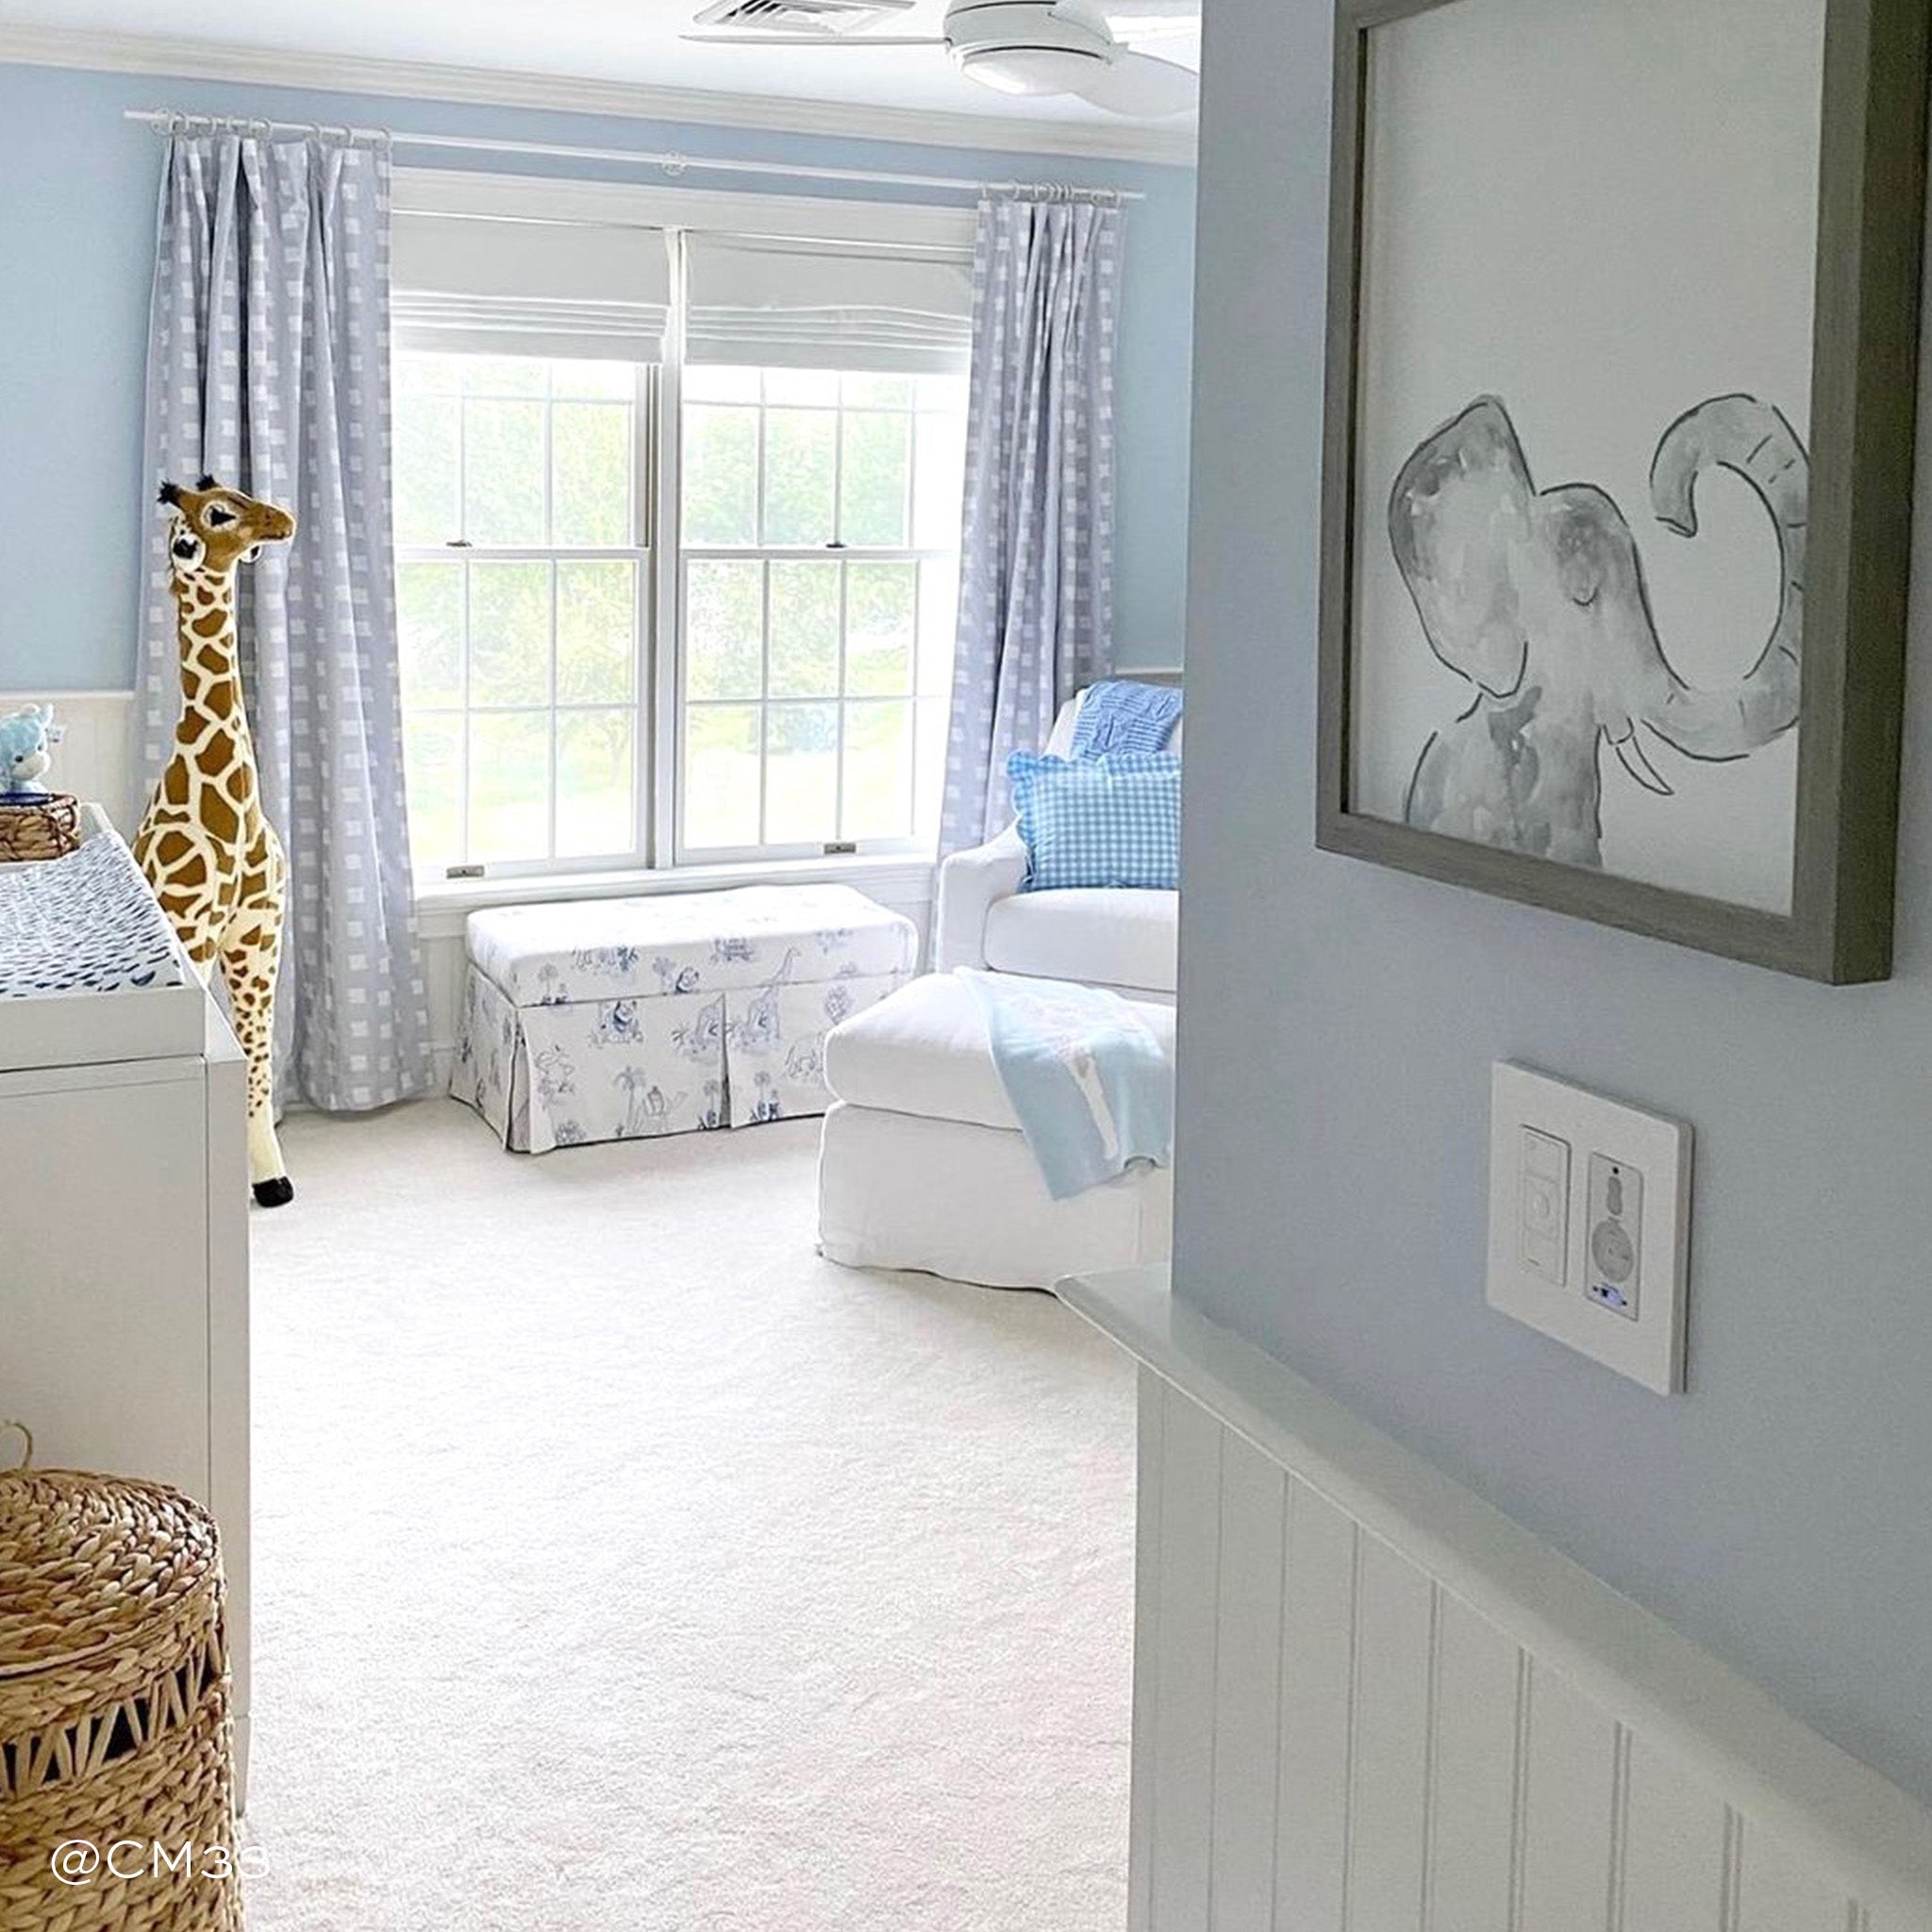 Nursery Room Styled with Sky Blue Pattern Printed Curtains with giraffe in front with white furniture and elephant painting in the entrance. Photo taken by CM33